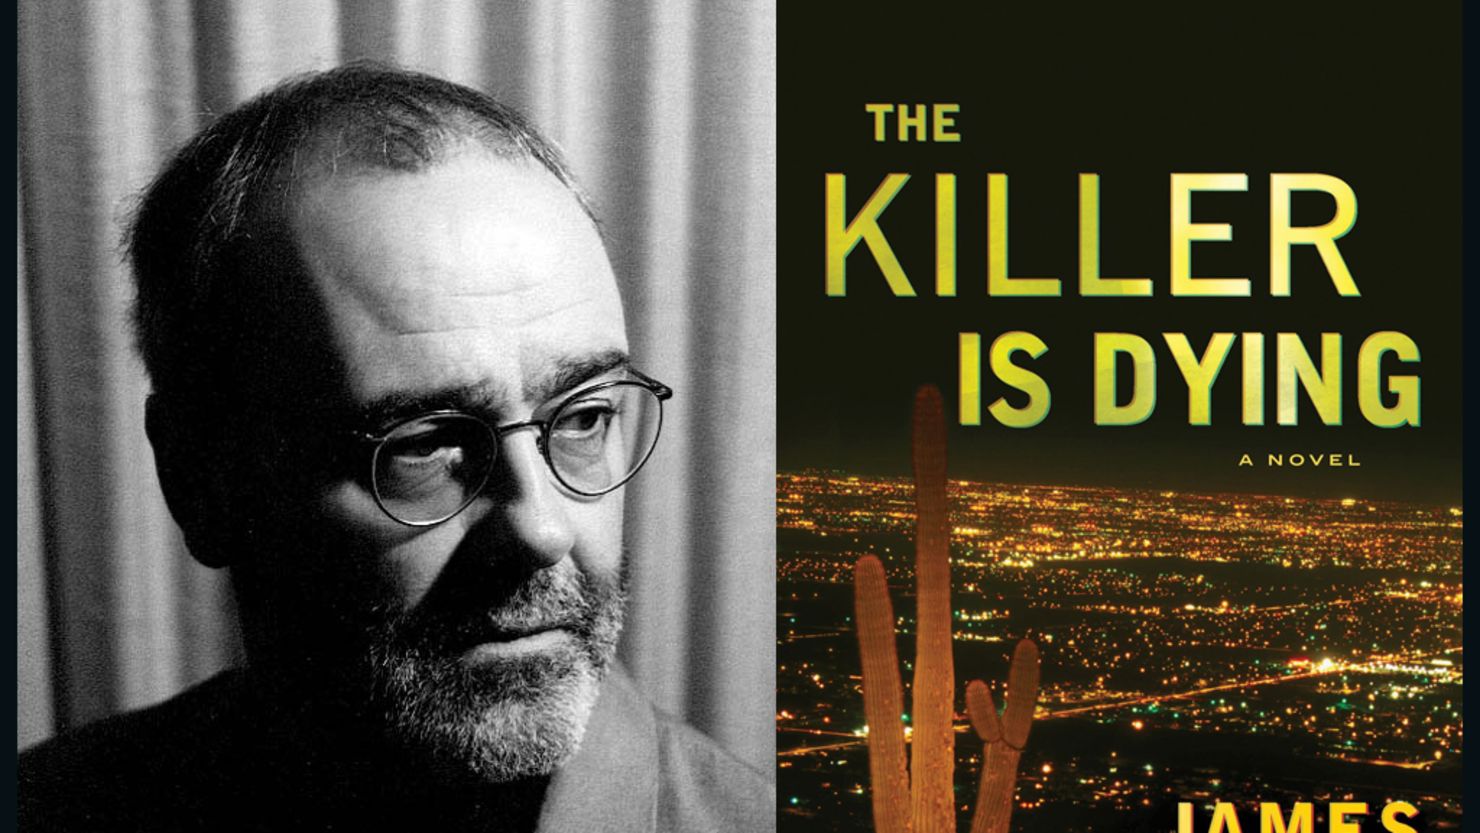 Author James Sallis returns with his latest novel, "The Killer is Dying."